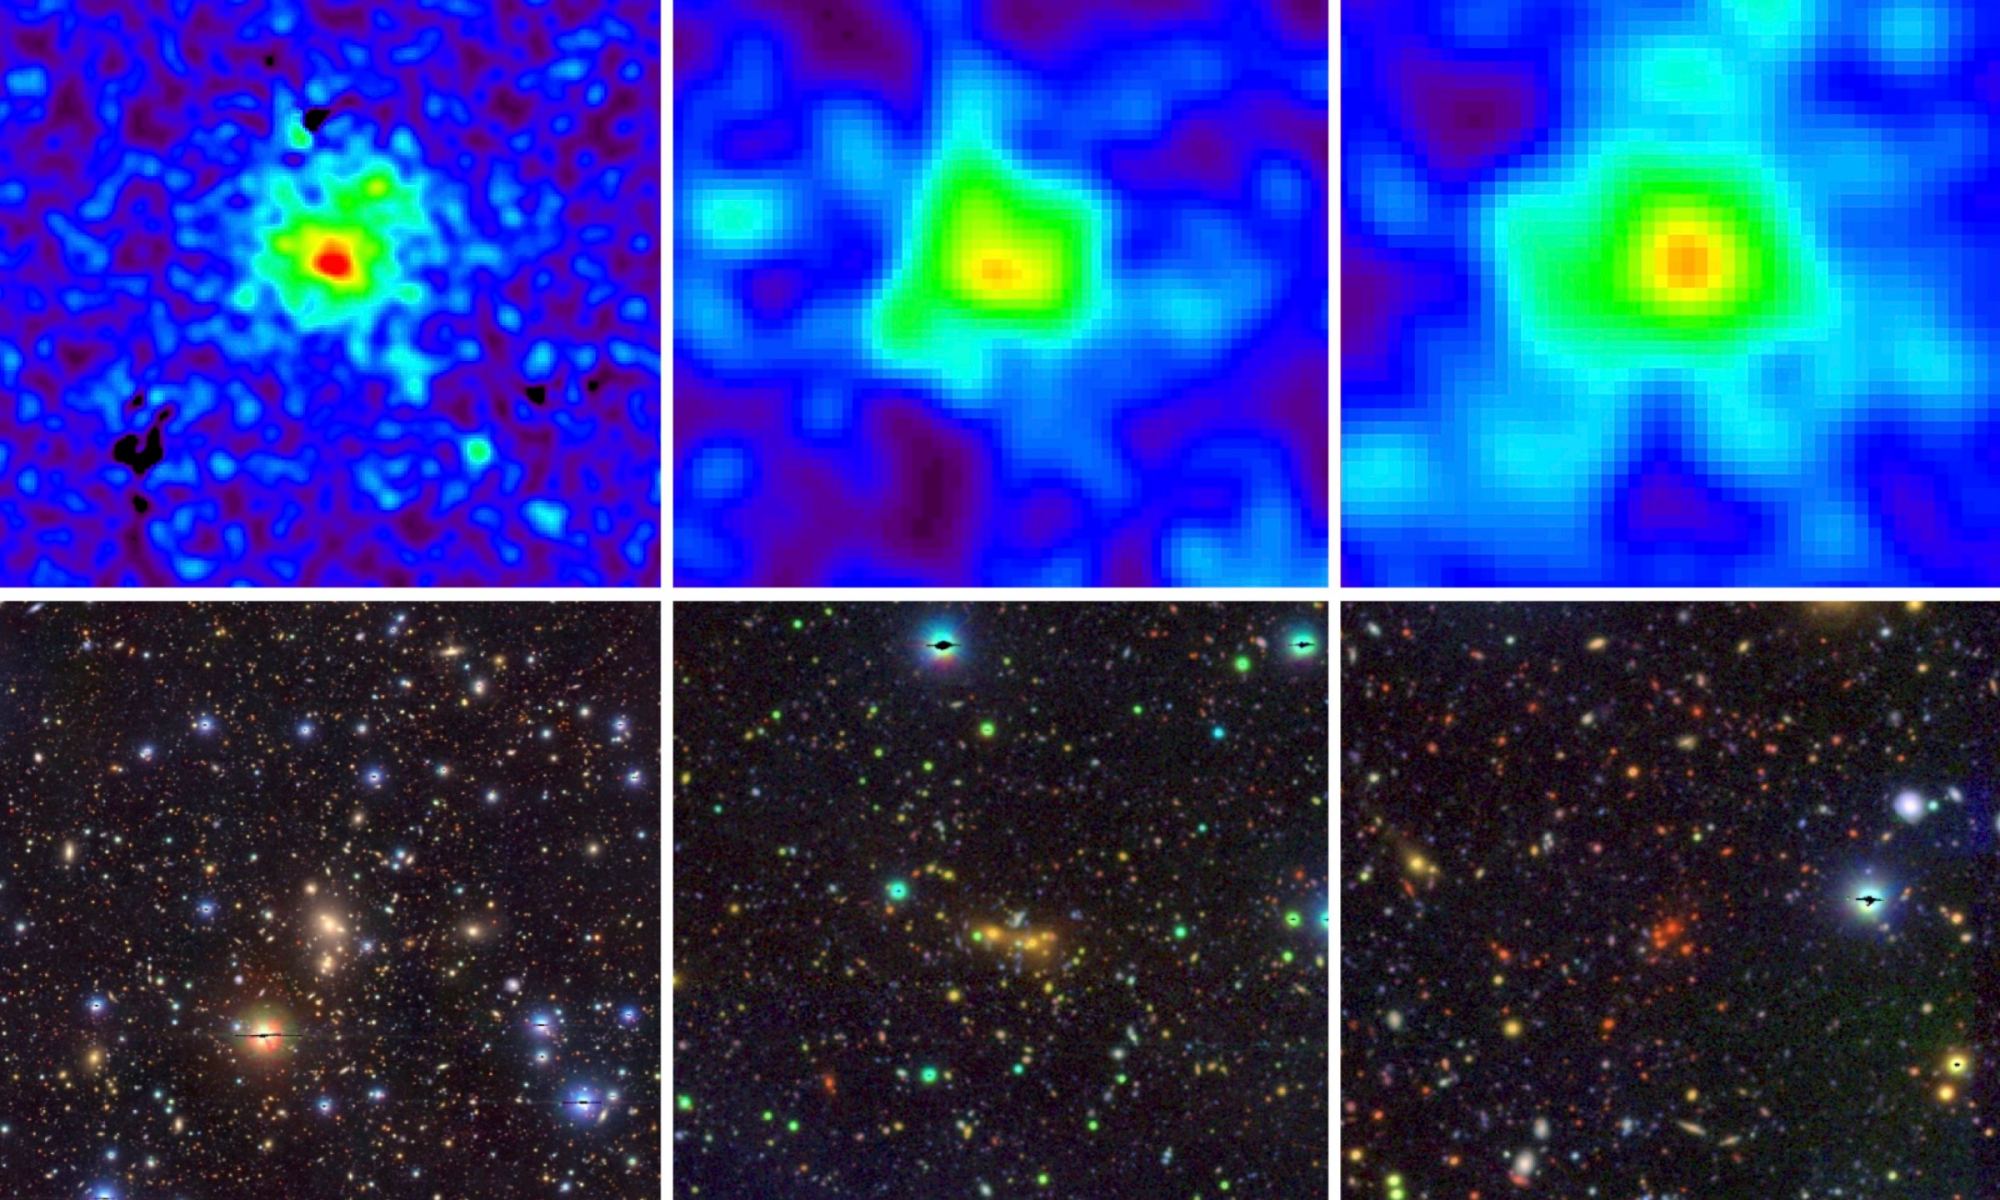 X-ray (top row) and optical pseudo-color (bottom row) images of three low mass clusters identified in the eFEDS survey data. The highest redshift cluster come from a time when the Universe was approximately 10 billion years younger than today. The cluster galaxies in that case are clearly much redder than the galaxies in the other two clusters. These galaxy clusters were used to determine th extent of dark matter across space and time. Courtesy: eRosita